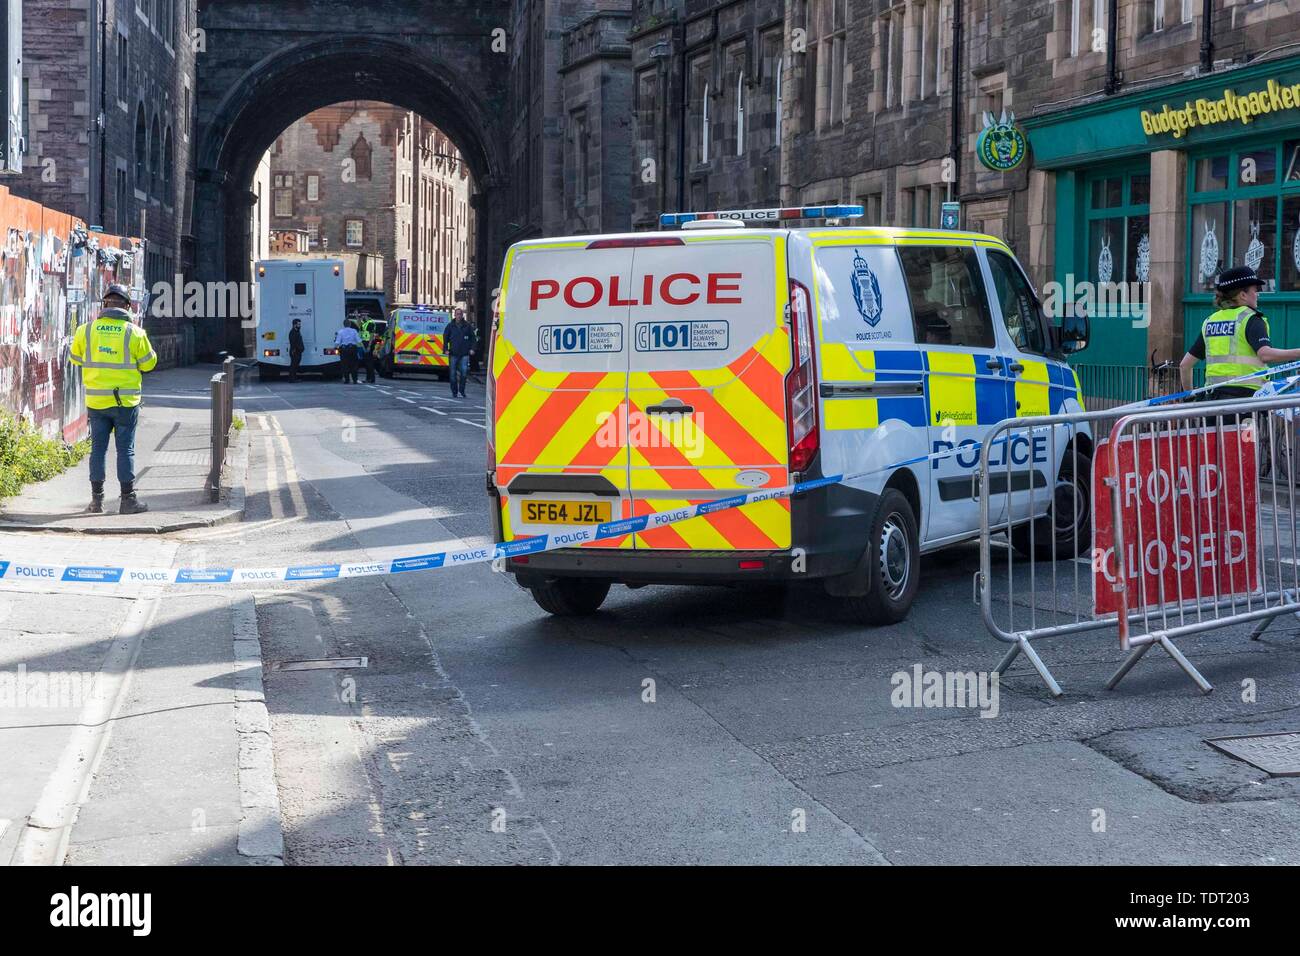 Edinburgh, Scotland, UK. 18th June, 2019. Edinburgh's Cowgate has been c loser falling reports of an individual falling from the George IV bridge. Police and ambulance are in attendance. Credit: Rich Dyson/Alamy Live News Stock Photo